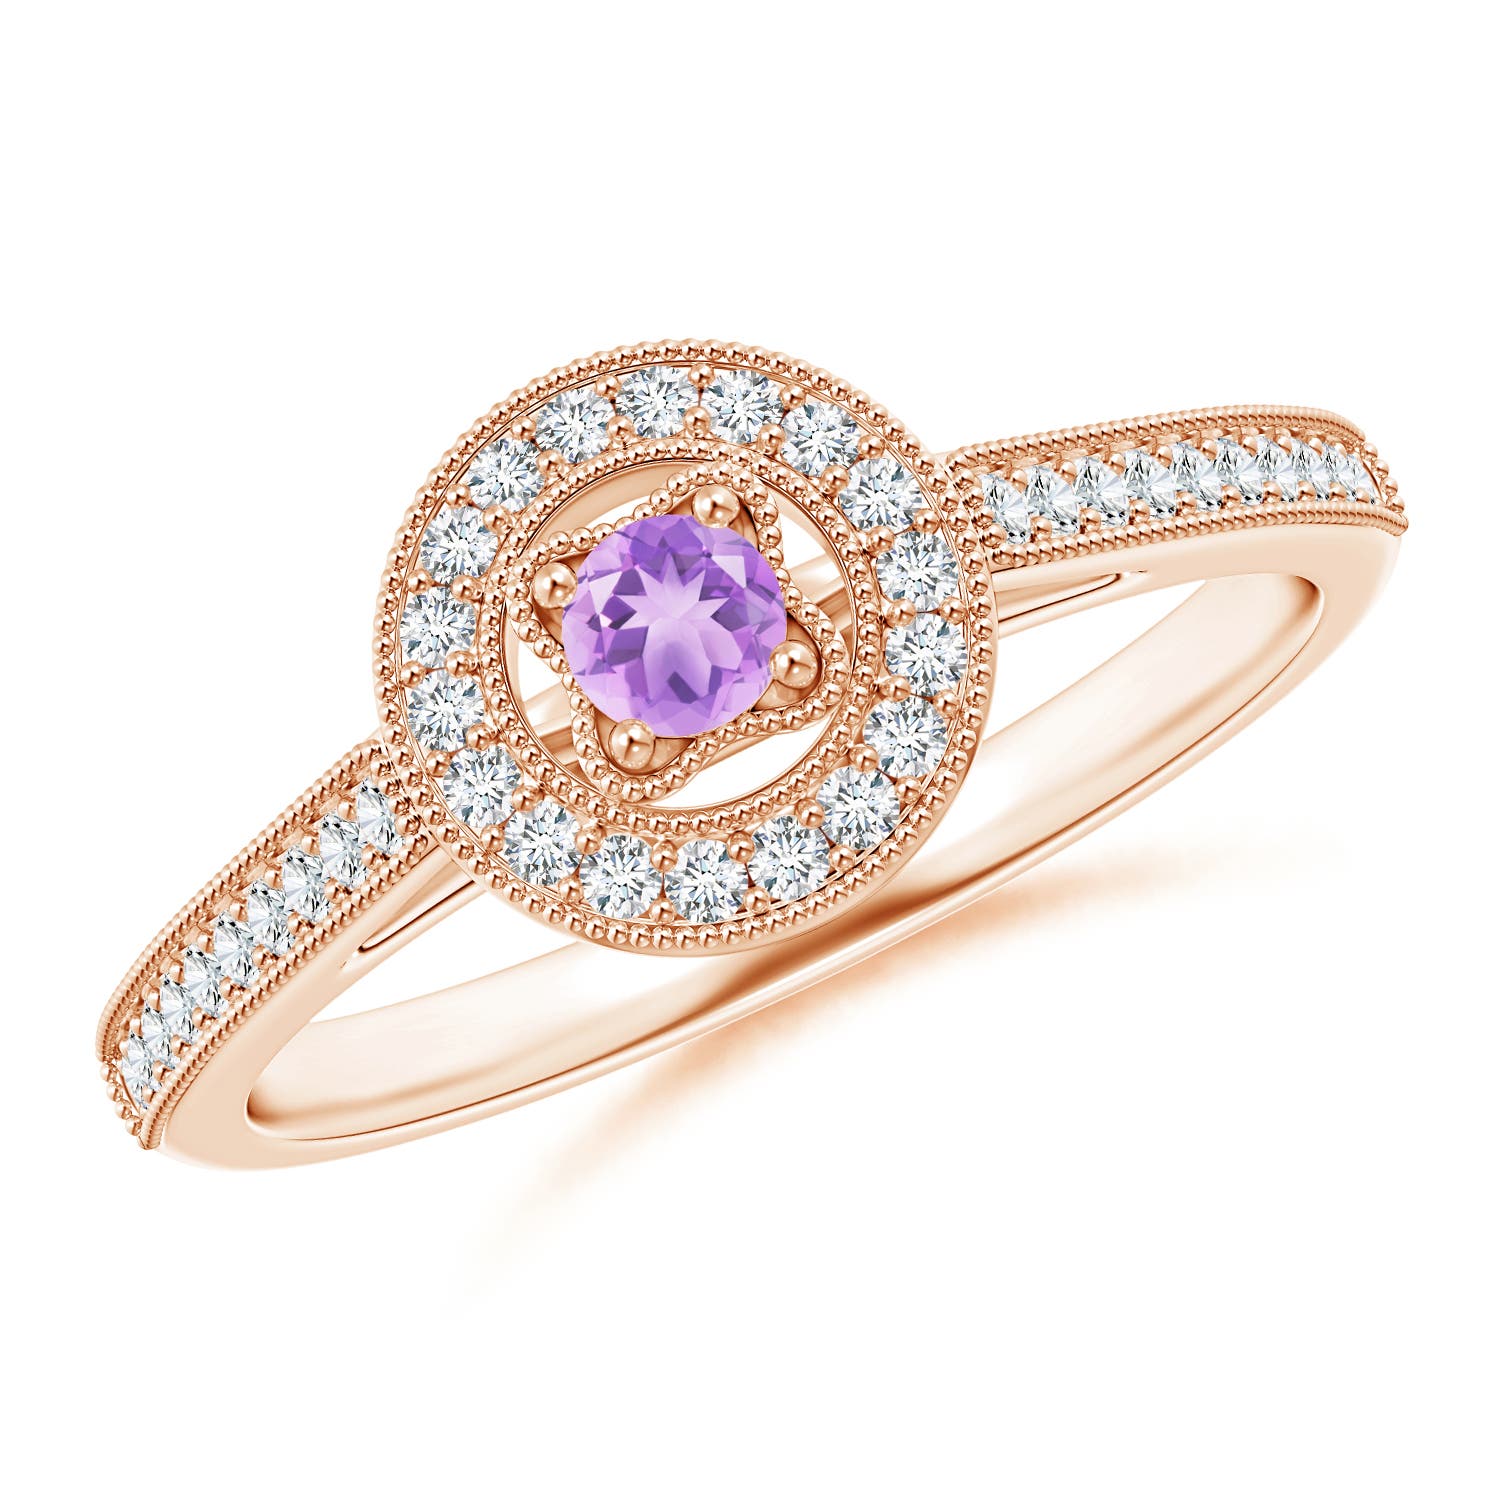 AA - Amethyst / 0.31 CT / 14 KT Rose Gold